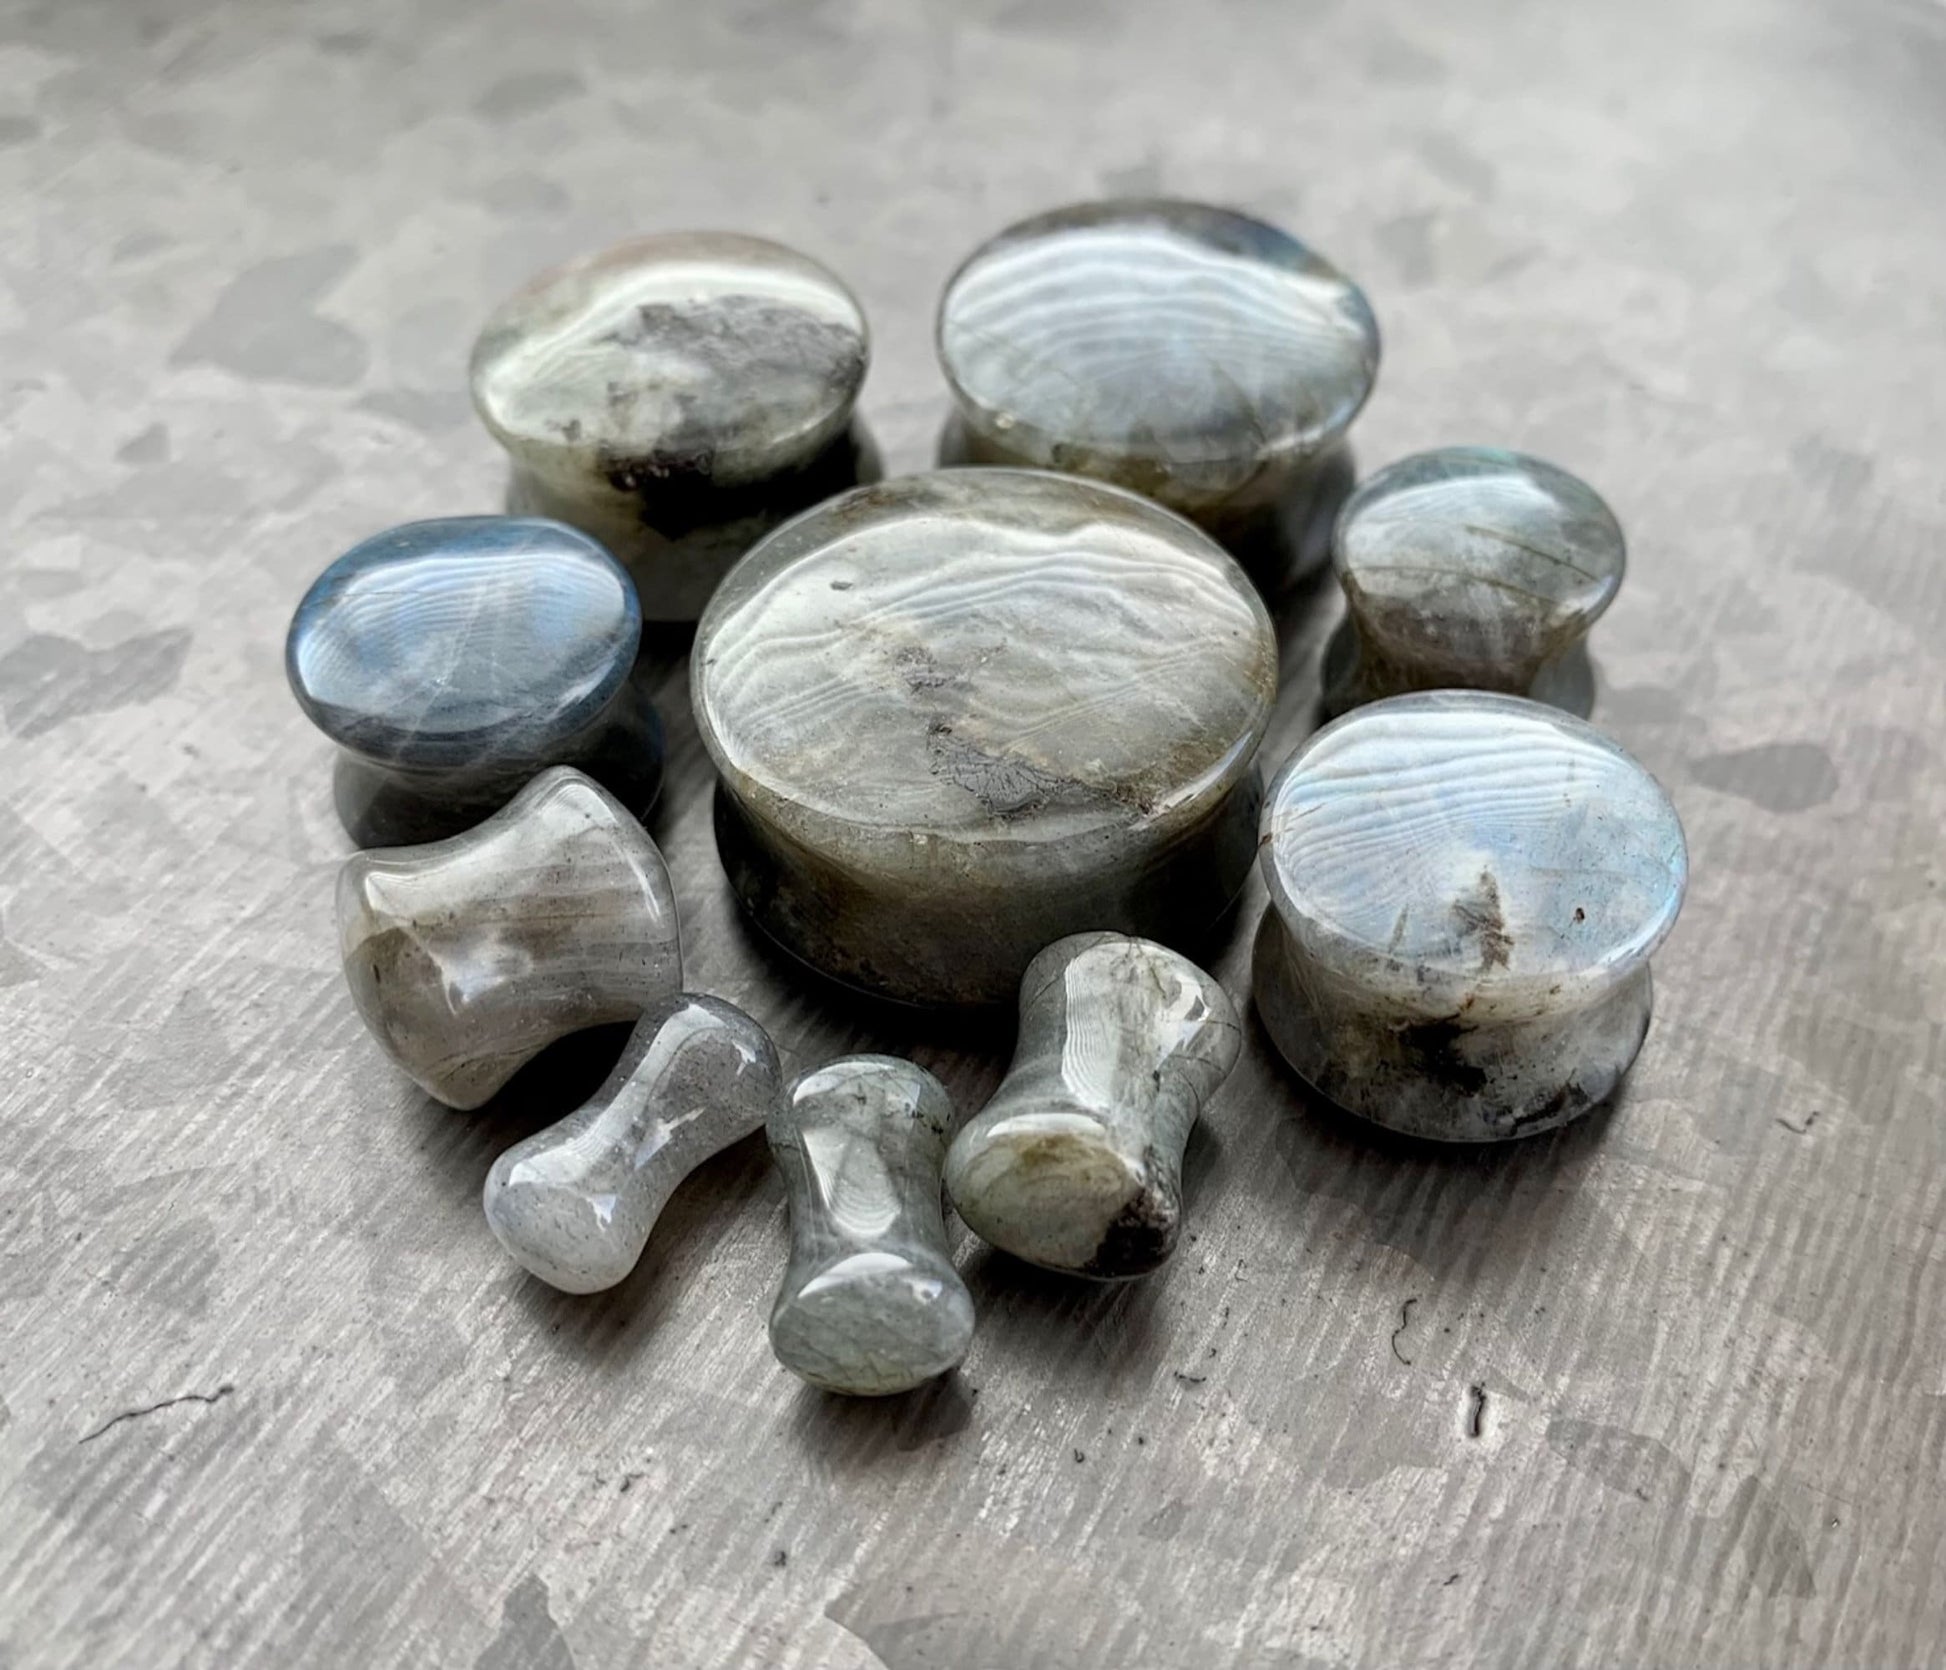 PAIR of Unique Labradorite Organic Natural Stone Double Flare Plugs/Tunnels - Gauges 4g (5mm) up to 1" (25mm) available!